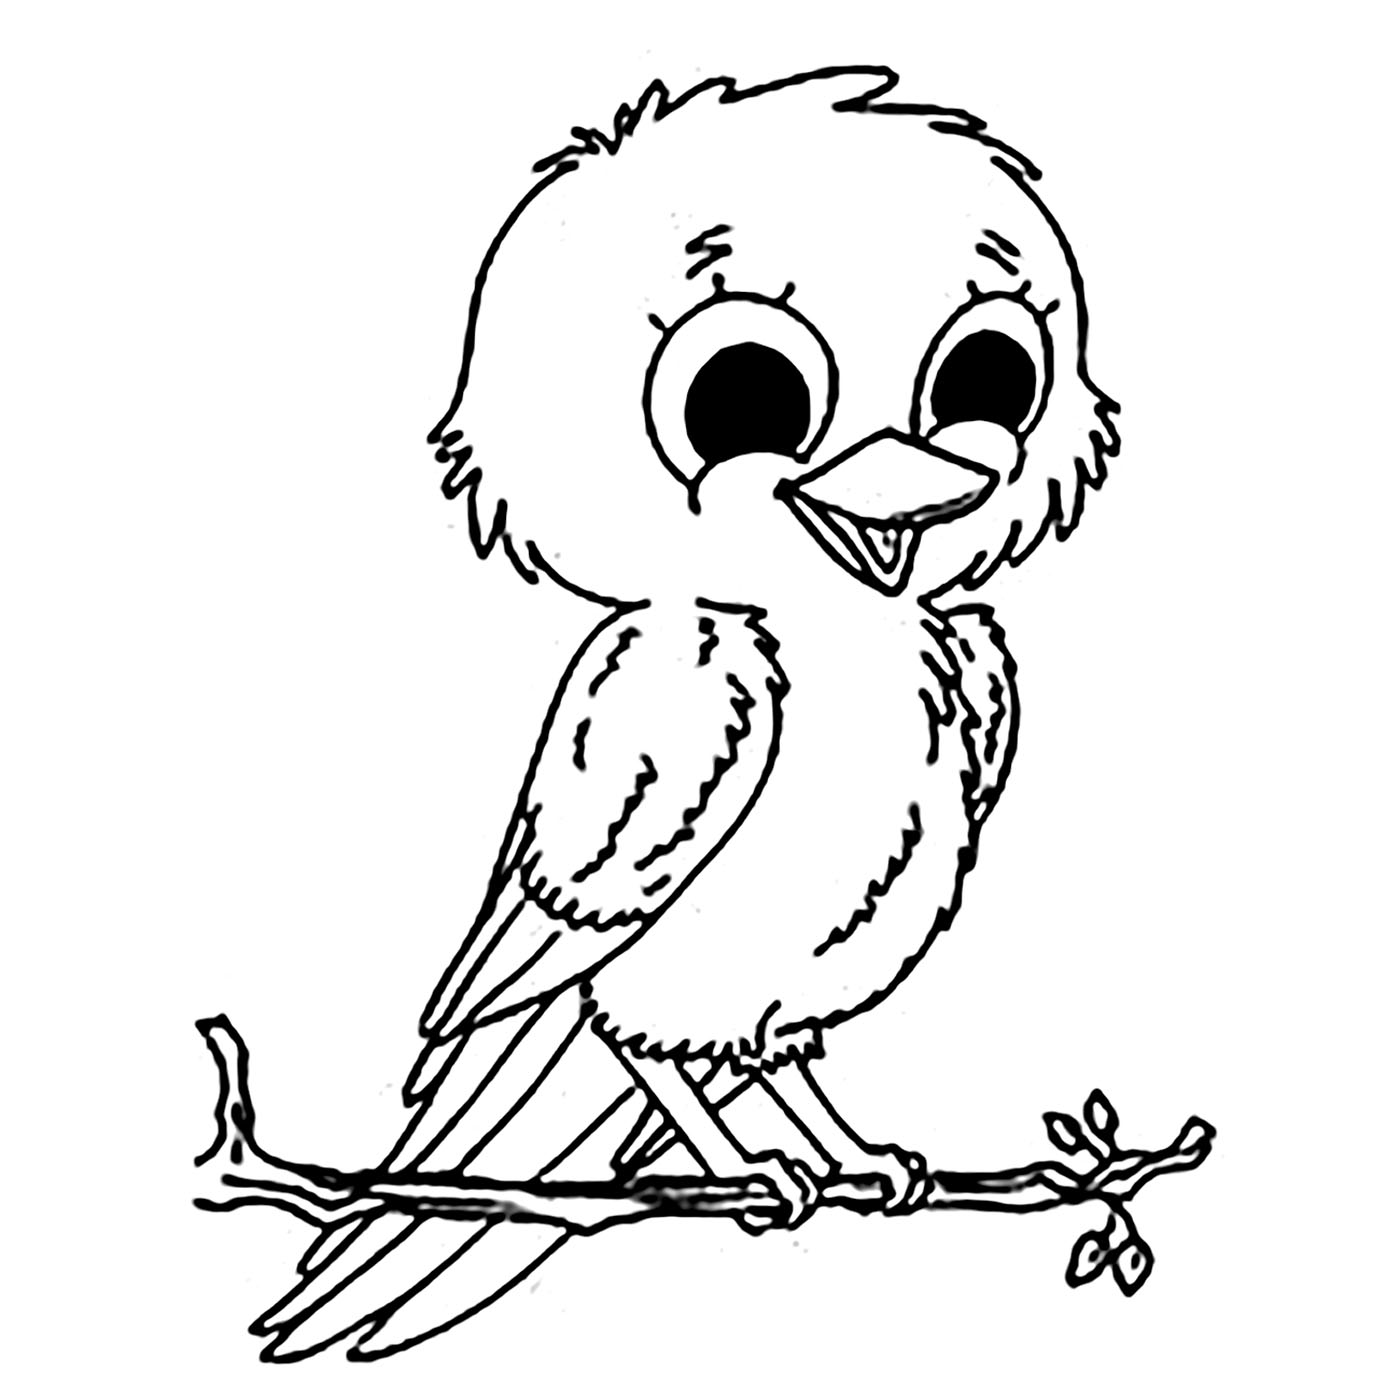 Little bird - Birds Kids Coloring Pages